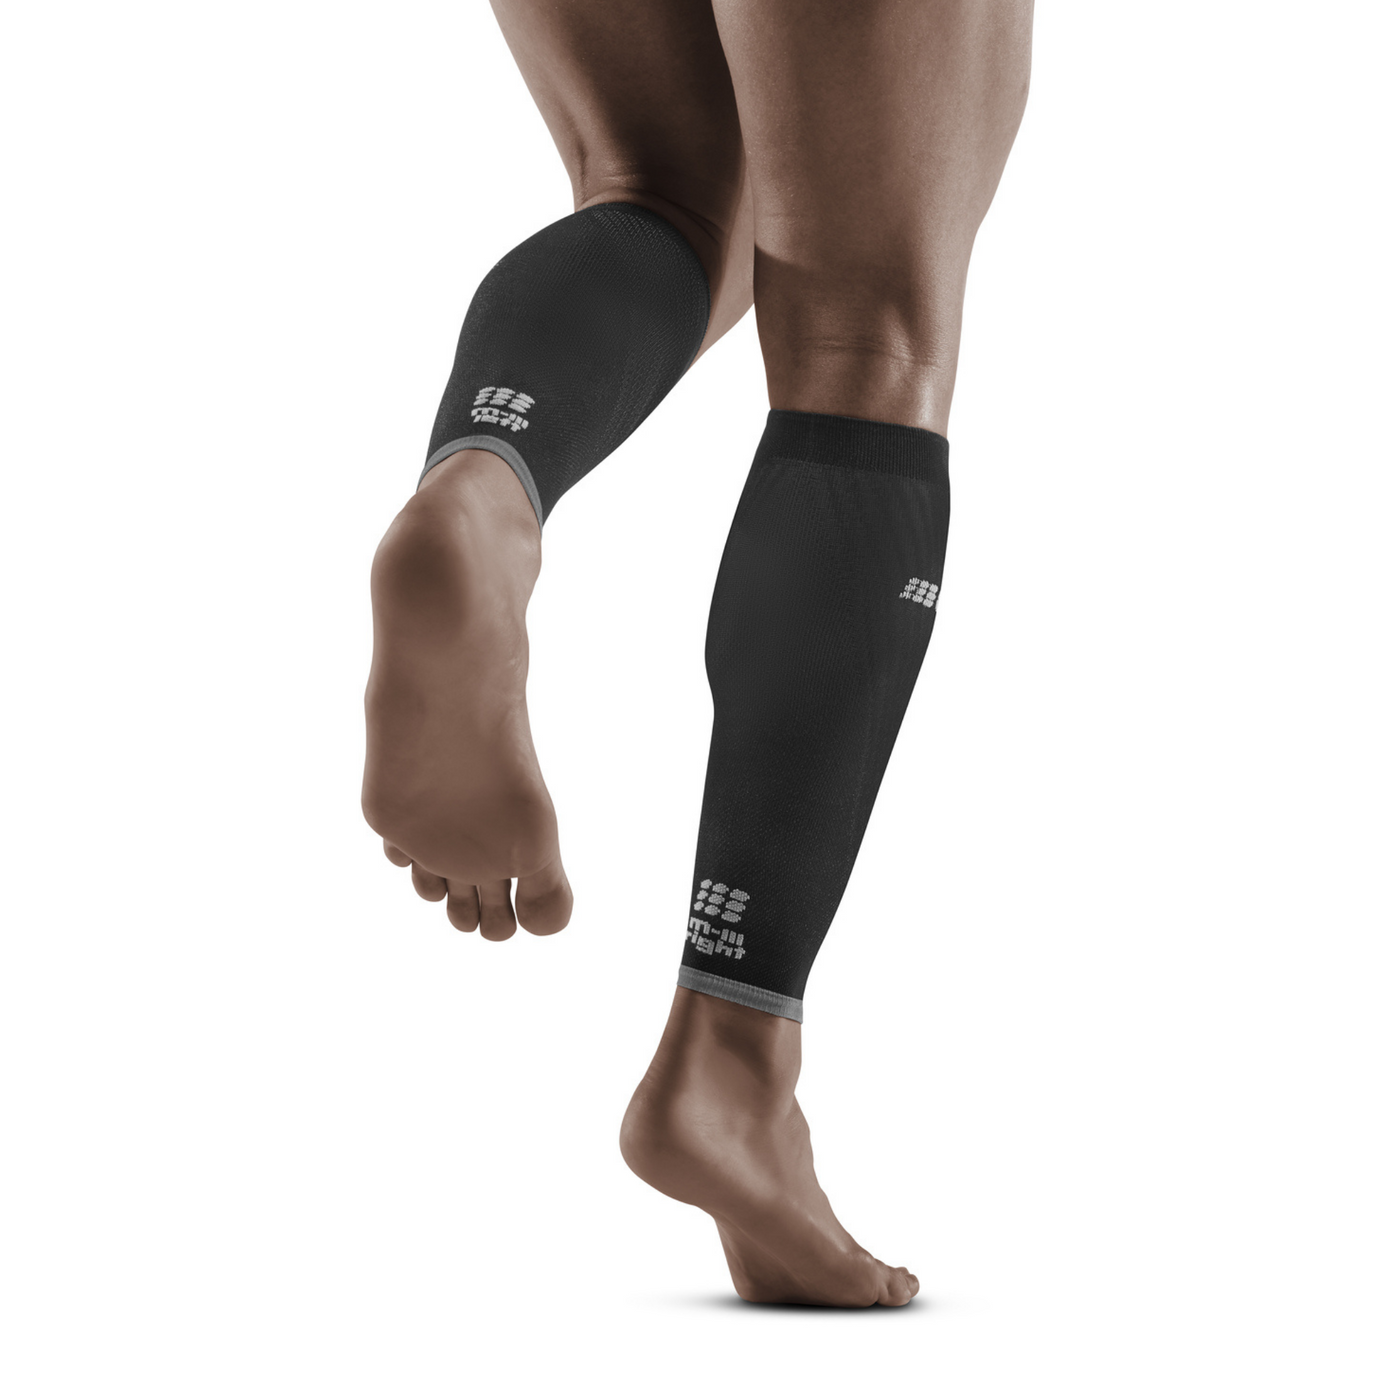 Ultralight Compression Calf Sleeves for Men | CEP Compression